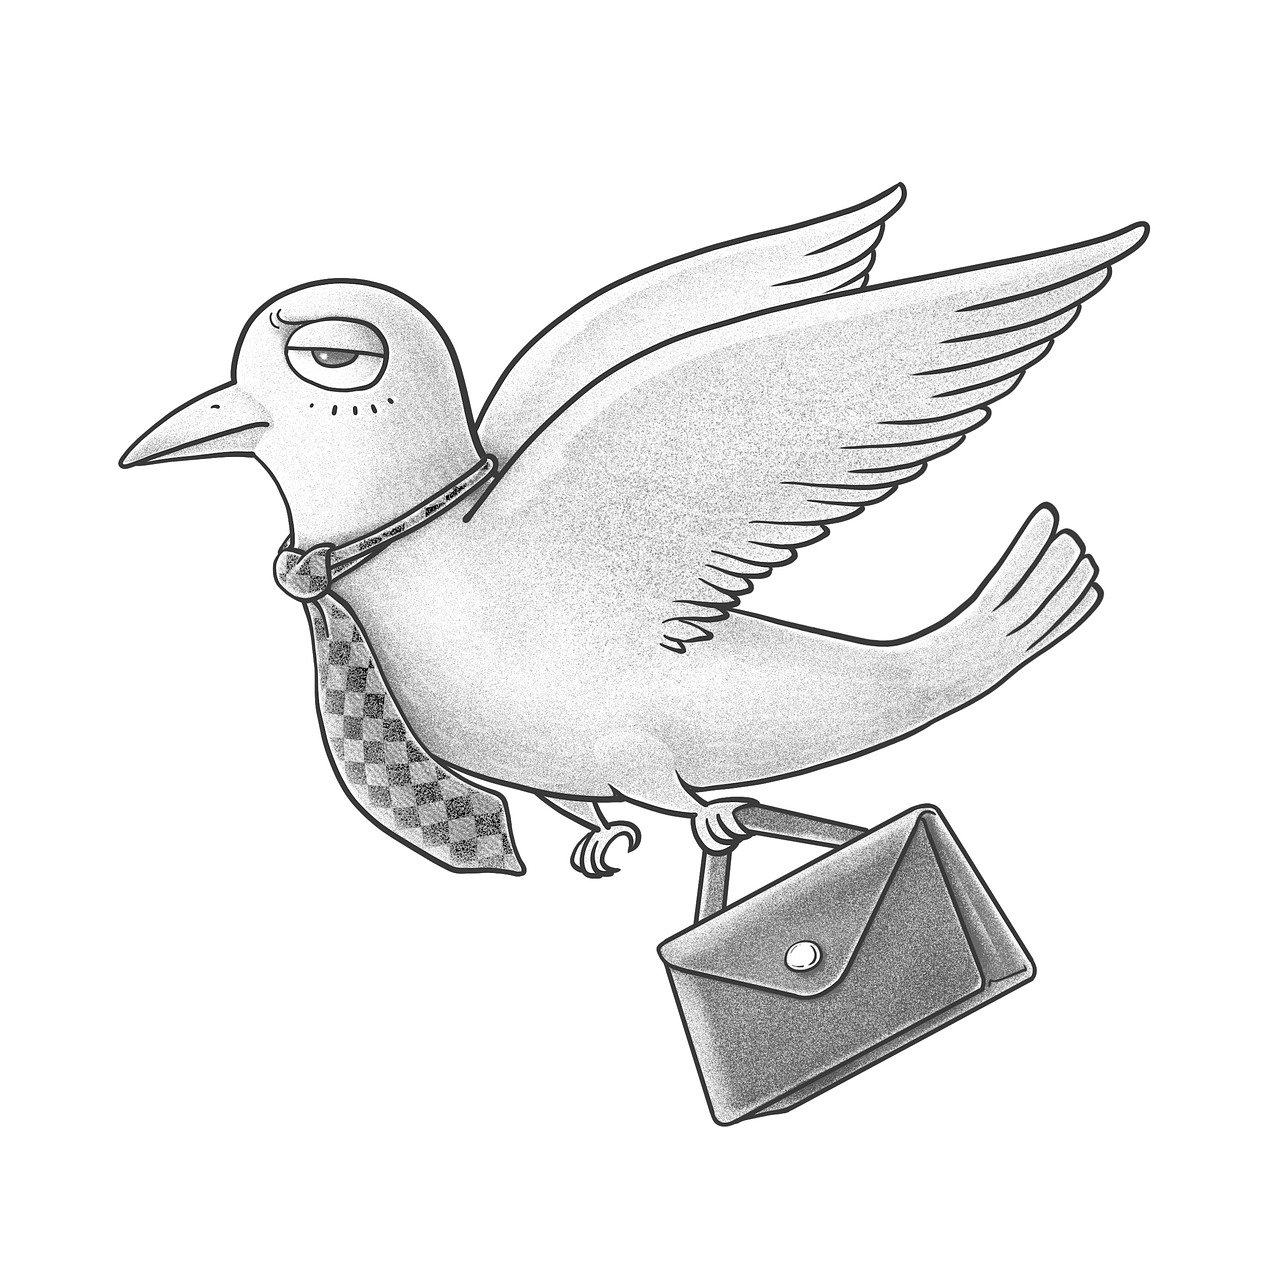 The Great Pigeon Post: When Birds Delivered the Mail (1815-1850)